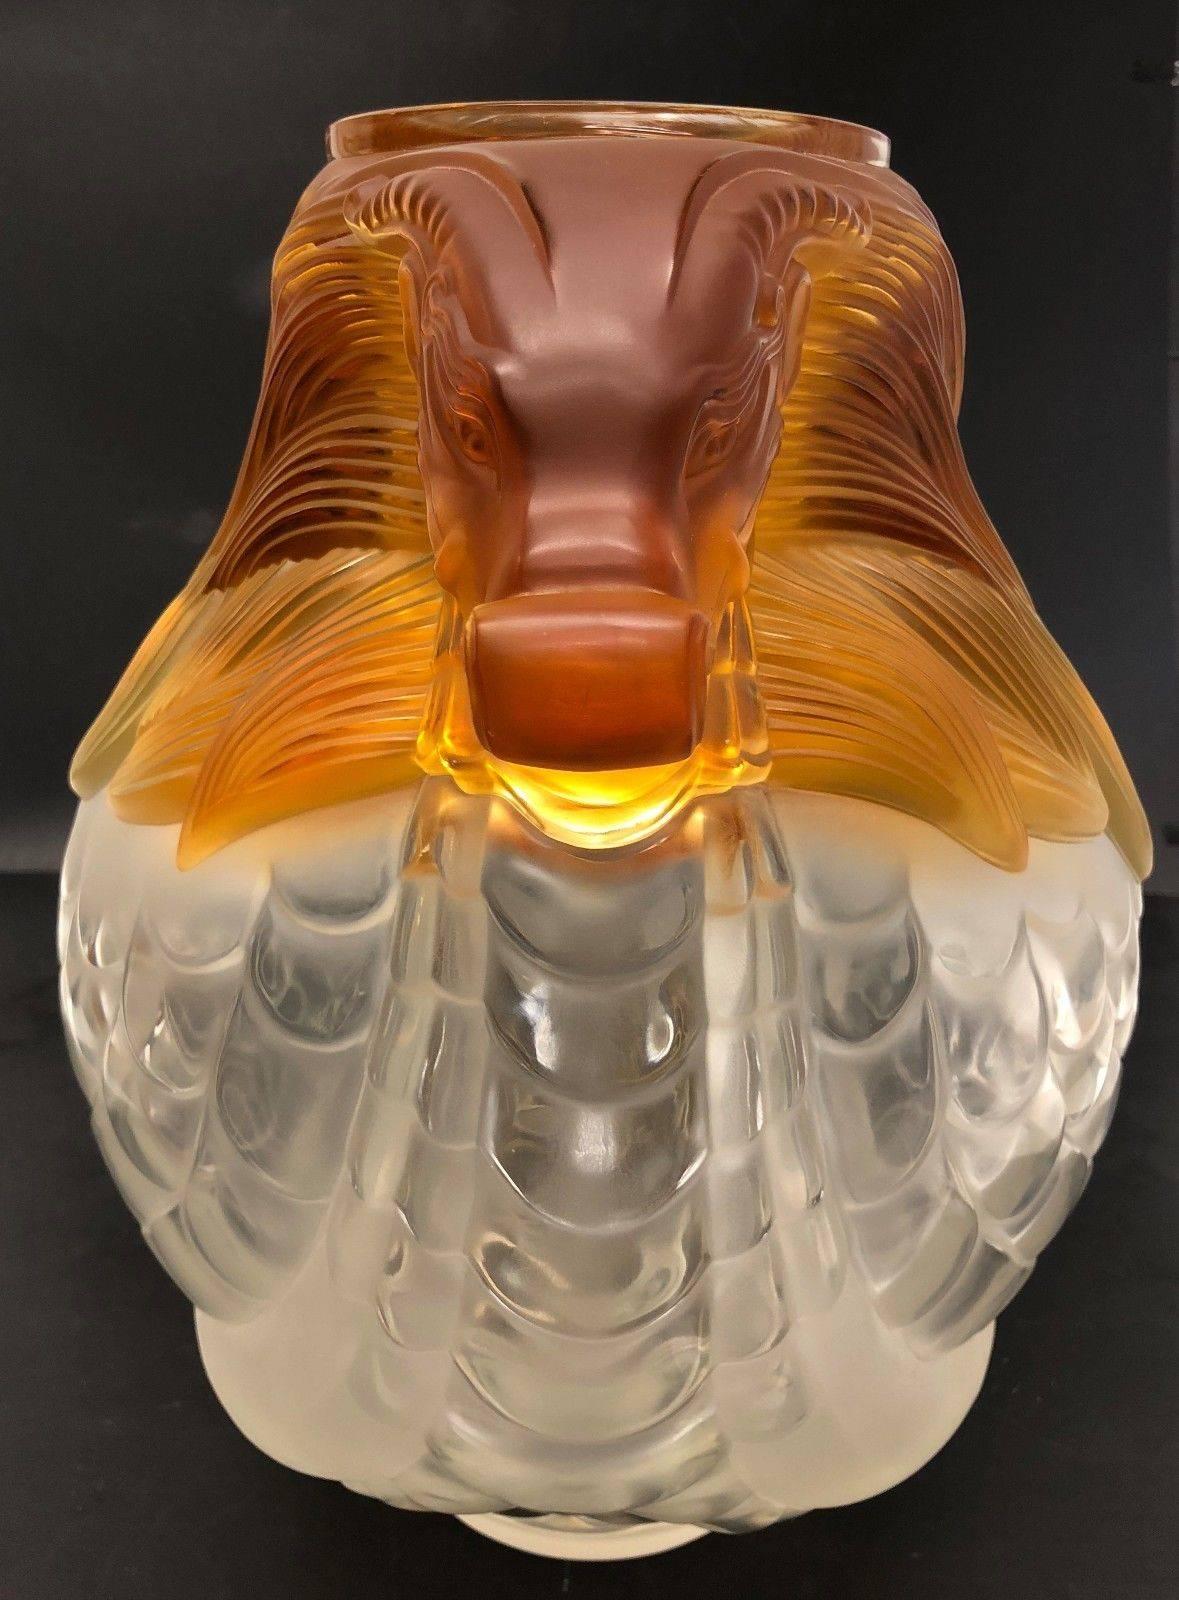 Art Glass Magnificent Lalique Frosted Crystal Amp Amber Vase Imperial Dragon Ltd Ed of 99 For Sale